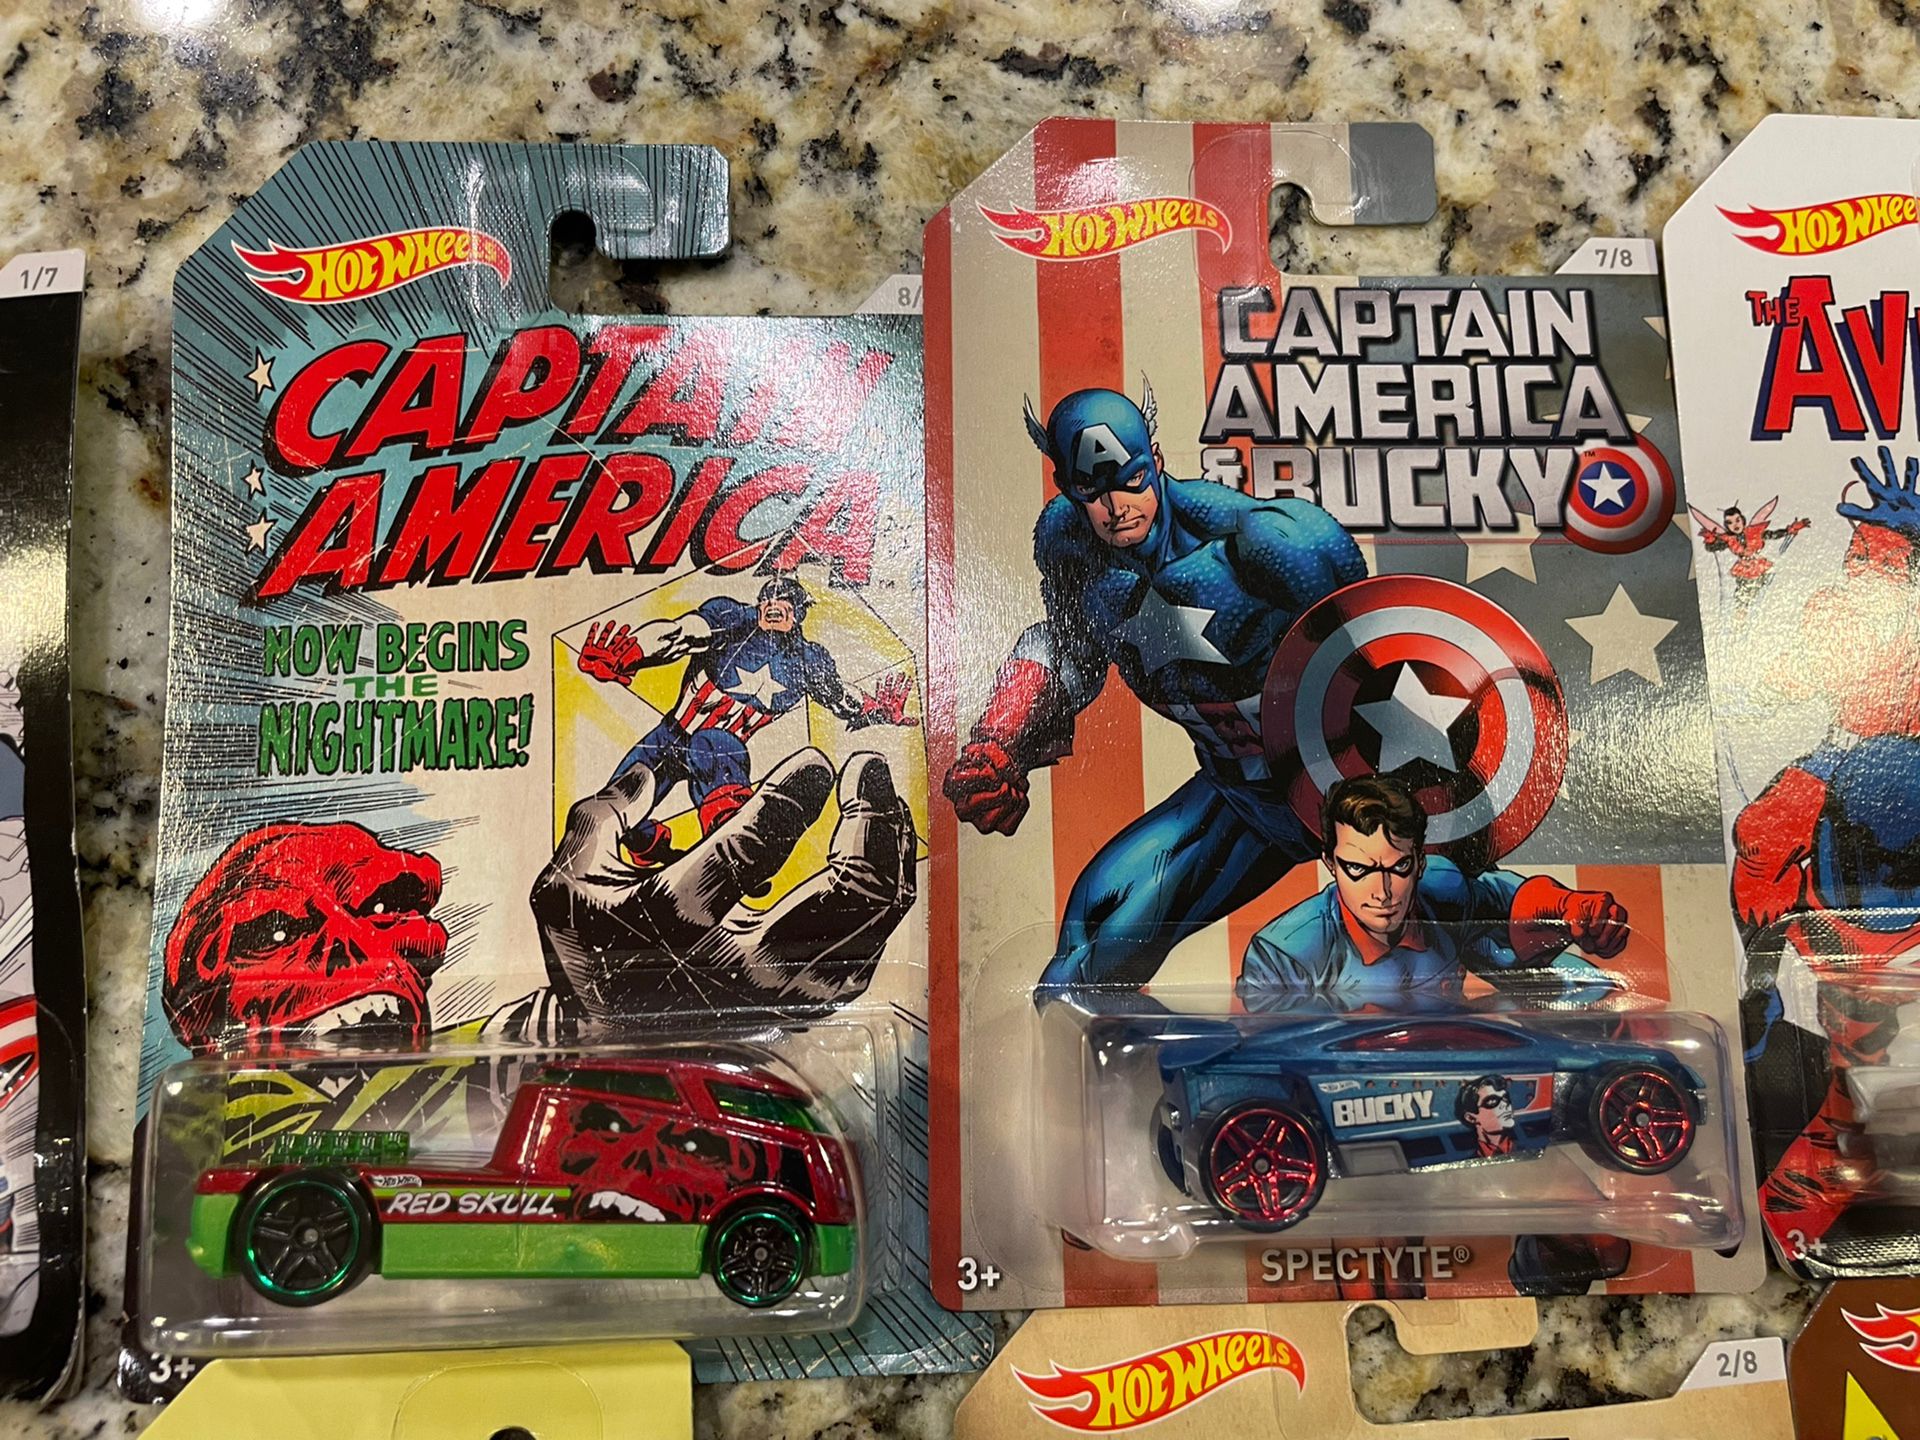 2015 Hot Wheels Captain America Complete Set of 8 With 3 0f The 7 2017 Wal-Mart Exclusive Avengers Set